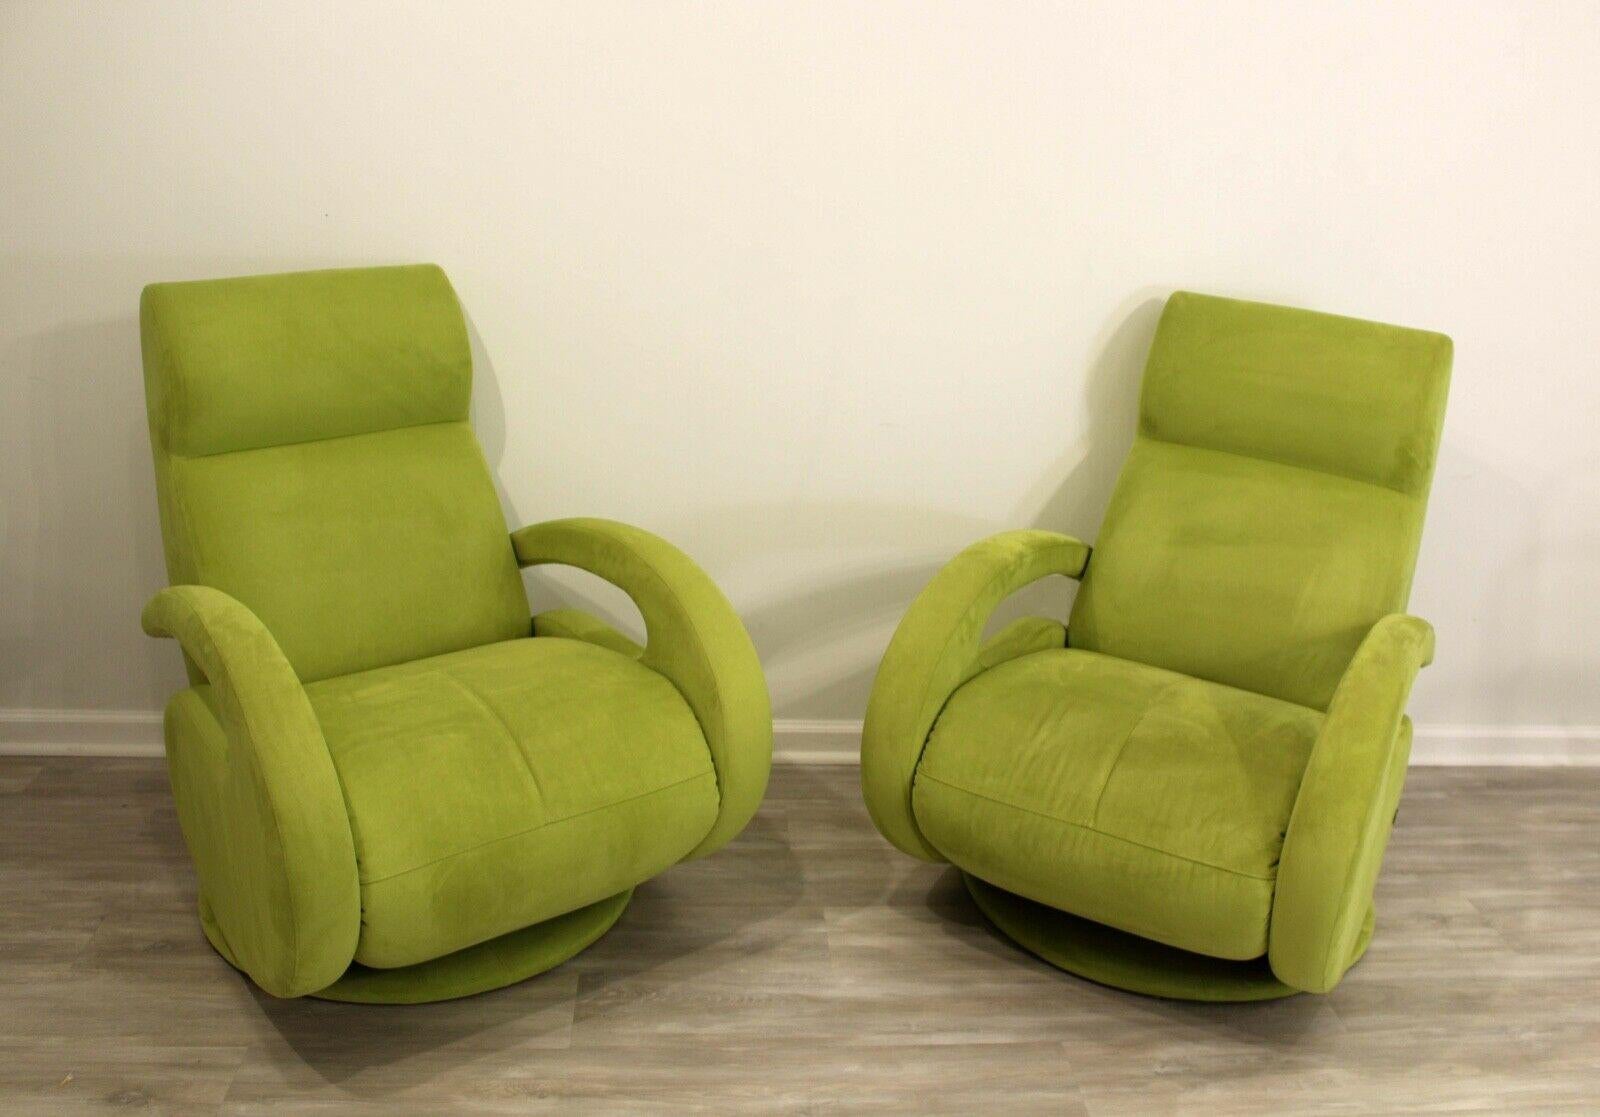 From Le Shoppe Too in Michigan comes this pair of incredibly comfortable pair of chartreuse chairs which both recline fully and swivel, offering the most ergonomic comfort for lounging. Both chairs are in very good condition with little signs of